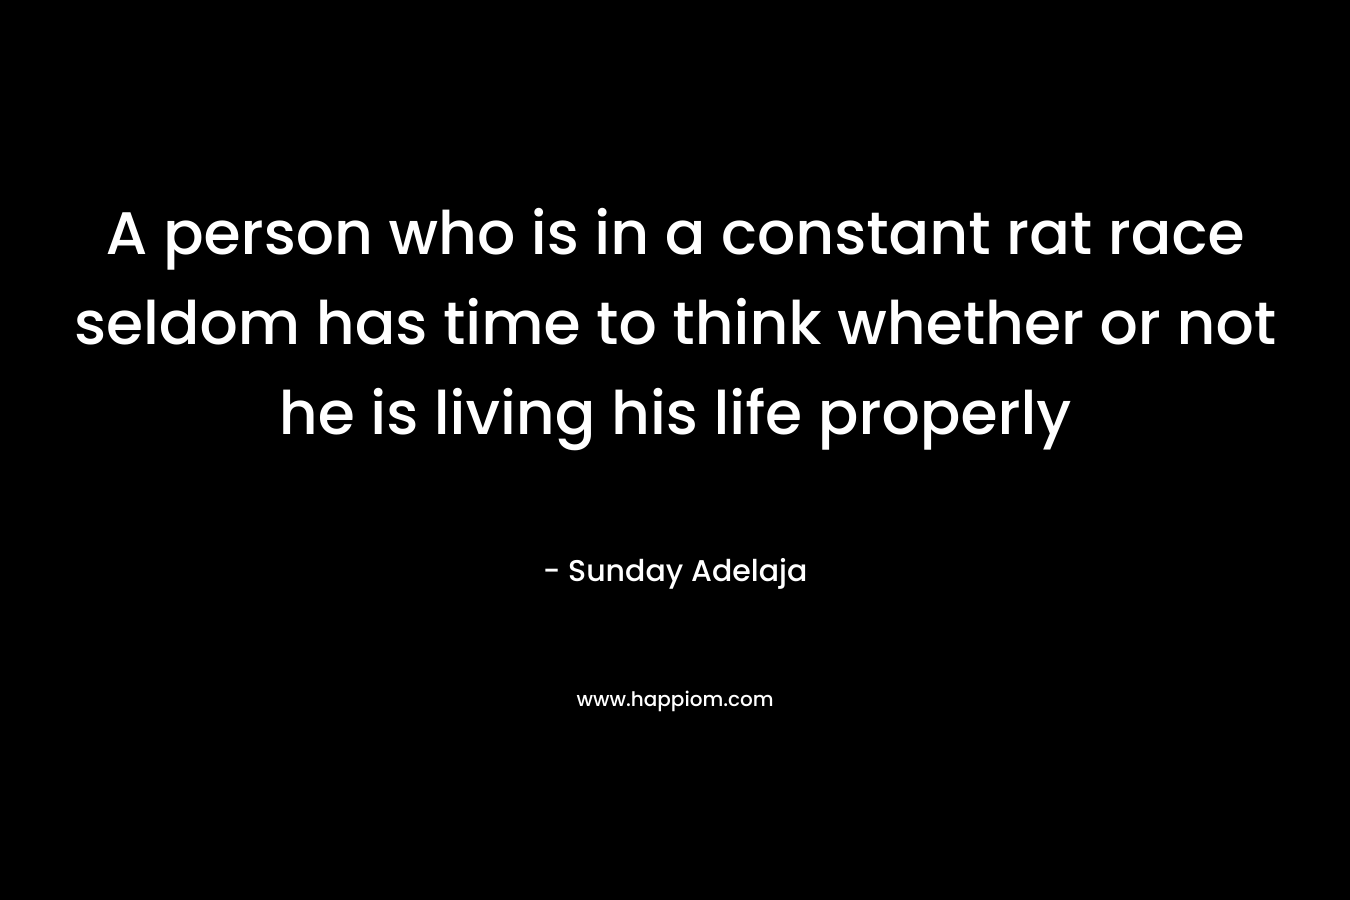 A person who is in a constant rat race seldom has time to think whether or not he is living his life properly